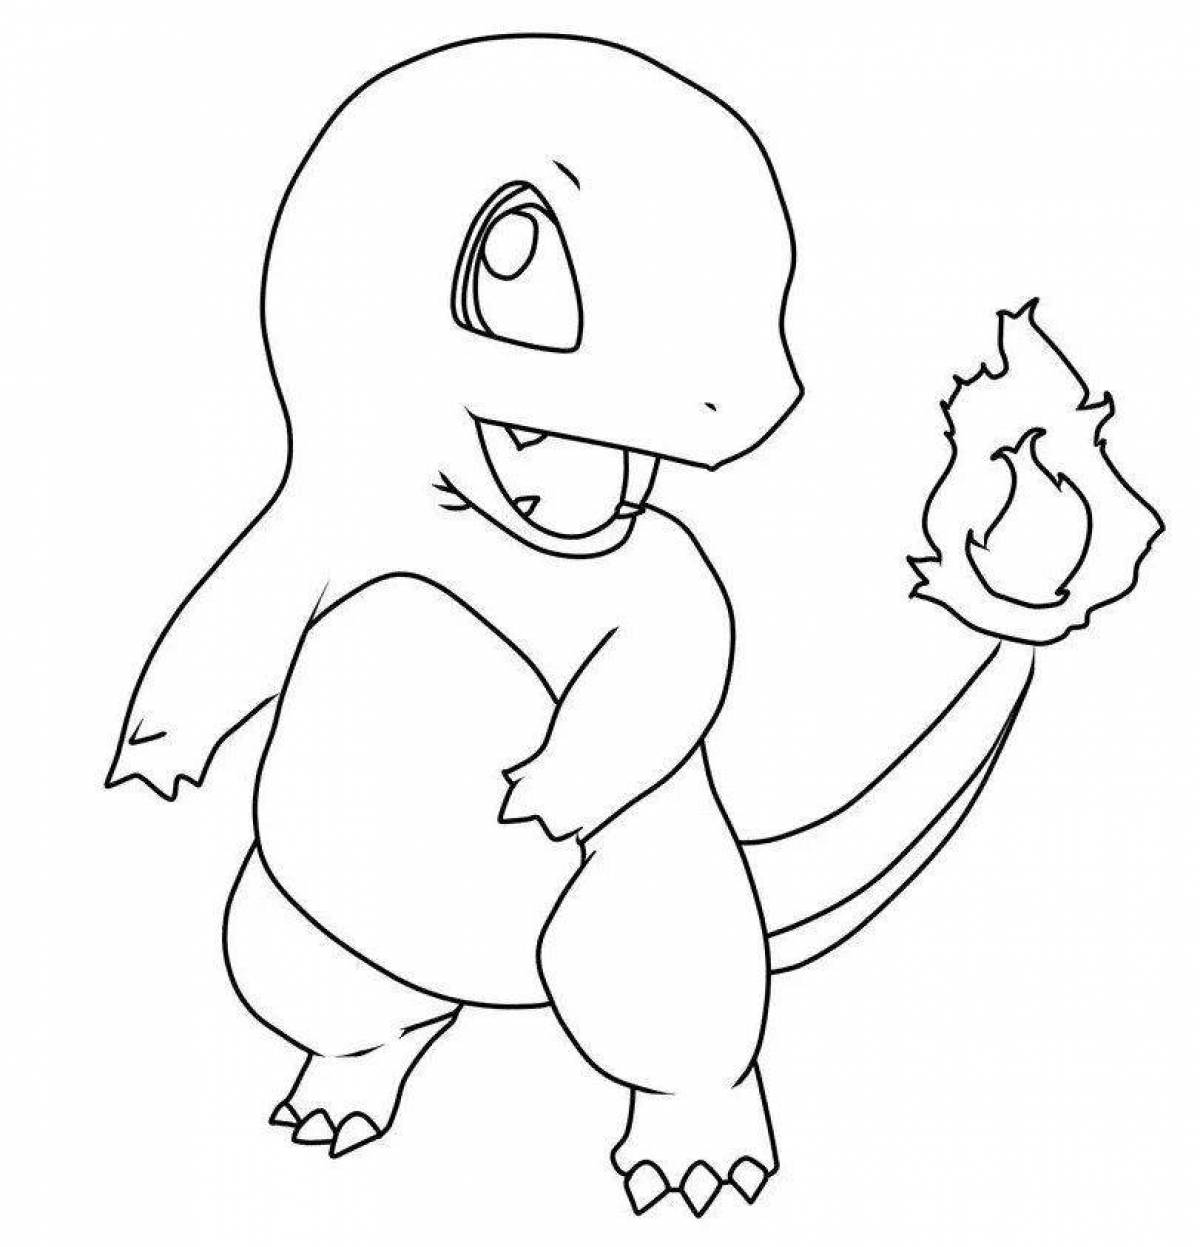 Coloring page graceful charmander